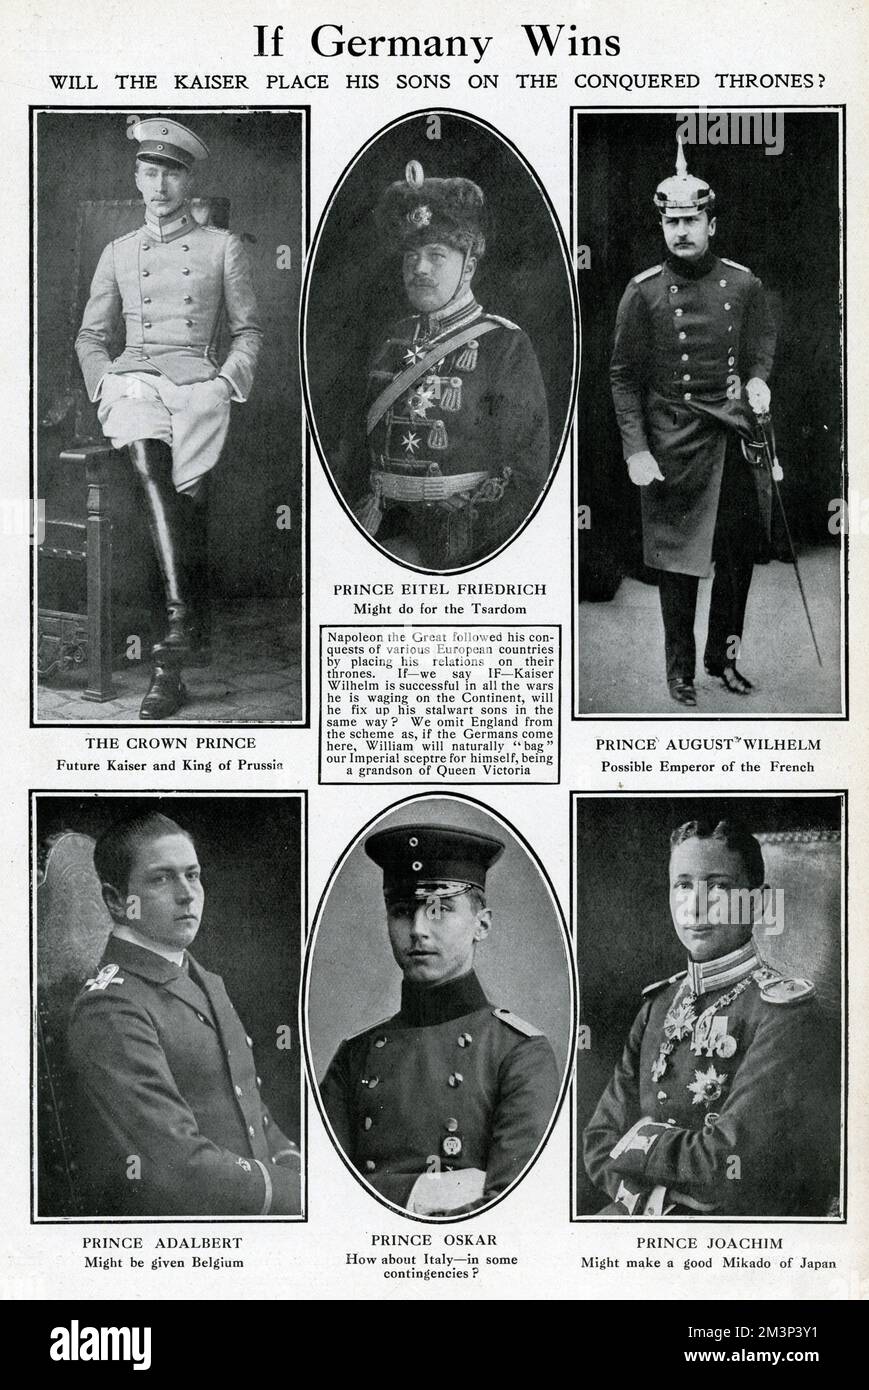 A rather sickening and defeatist (or perhaps tongue-in-cheek) item, suggesting what might happen if Germany wins the First World War.  Just as Napoleon placed his family members on various European thrones, so Wilhelm II might appoint his sons to different countries.       Date: 1914 Stock Photo